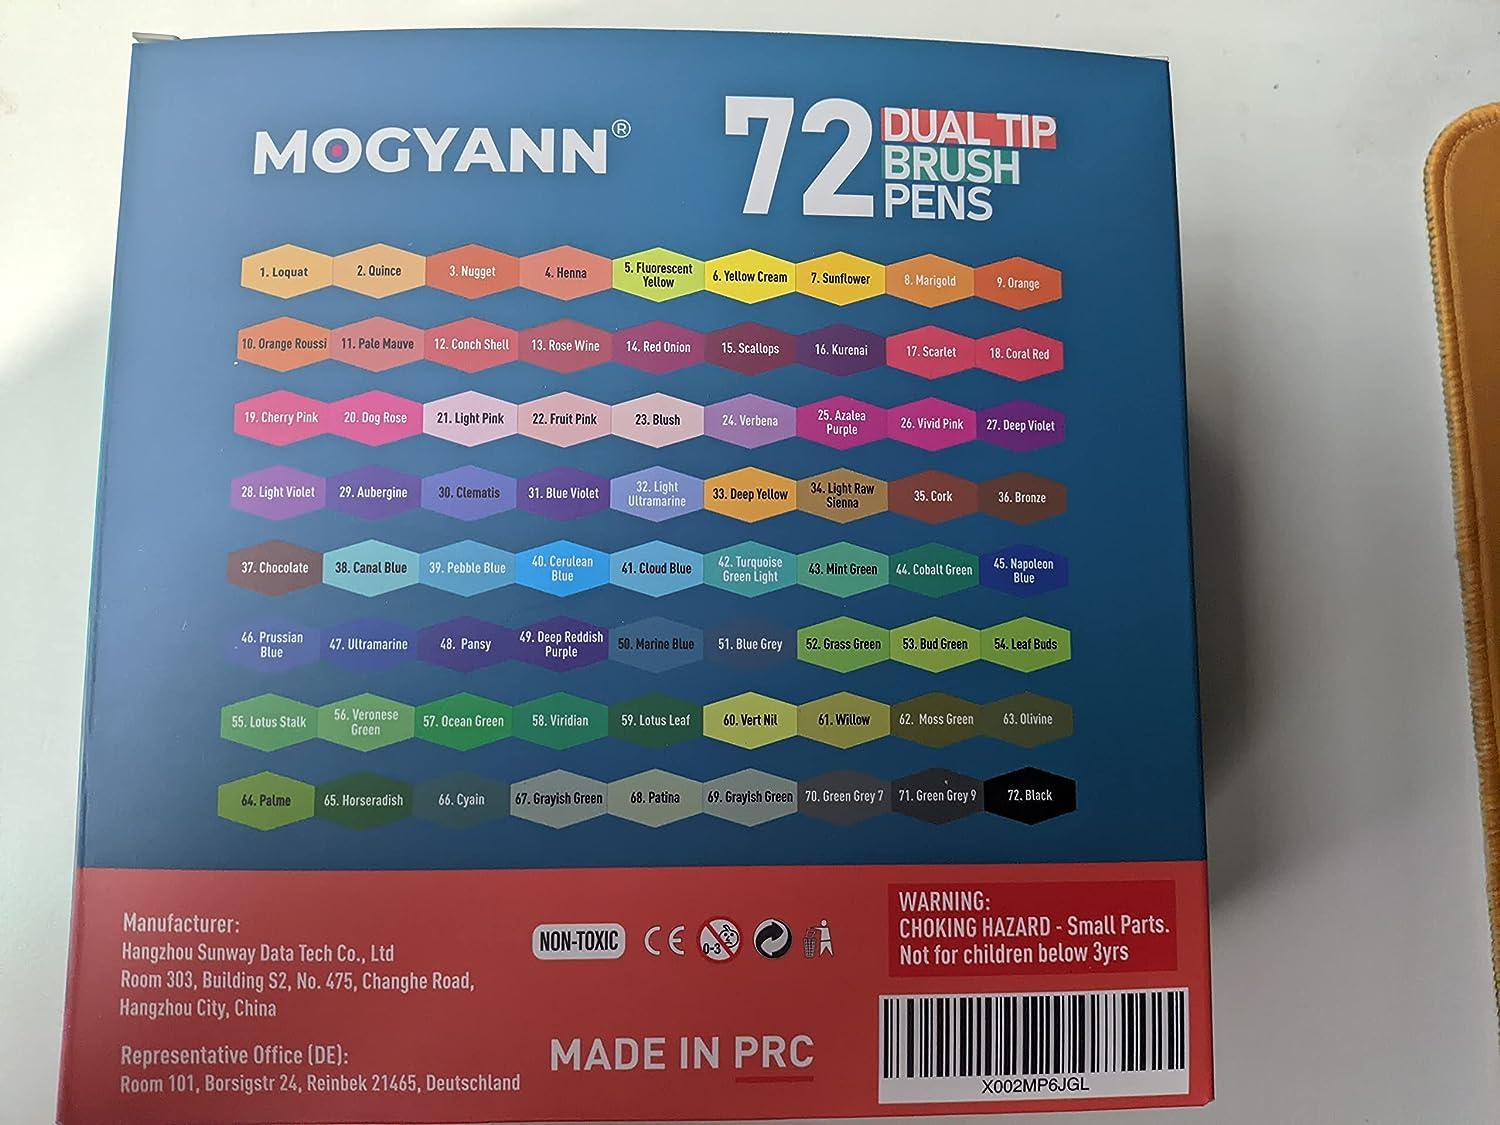 Mogyann 72 Colors Markers for Adult Coloring Books Dual Tip Pens with  Calligraphy Markers and Fine Tip Markers